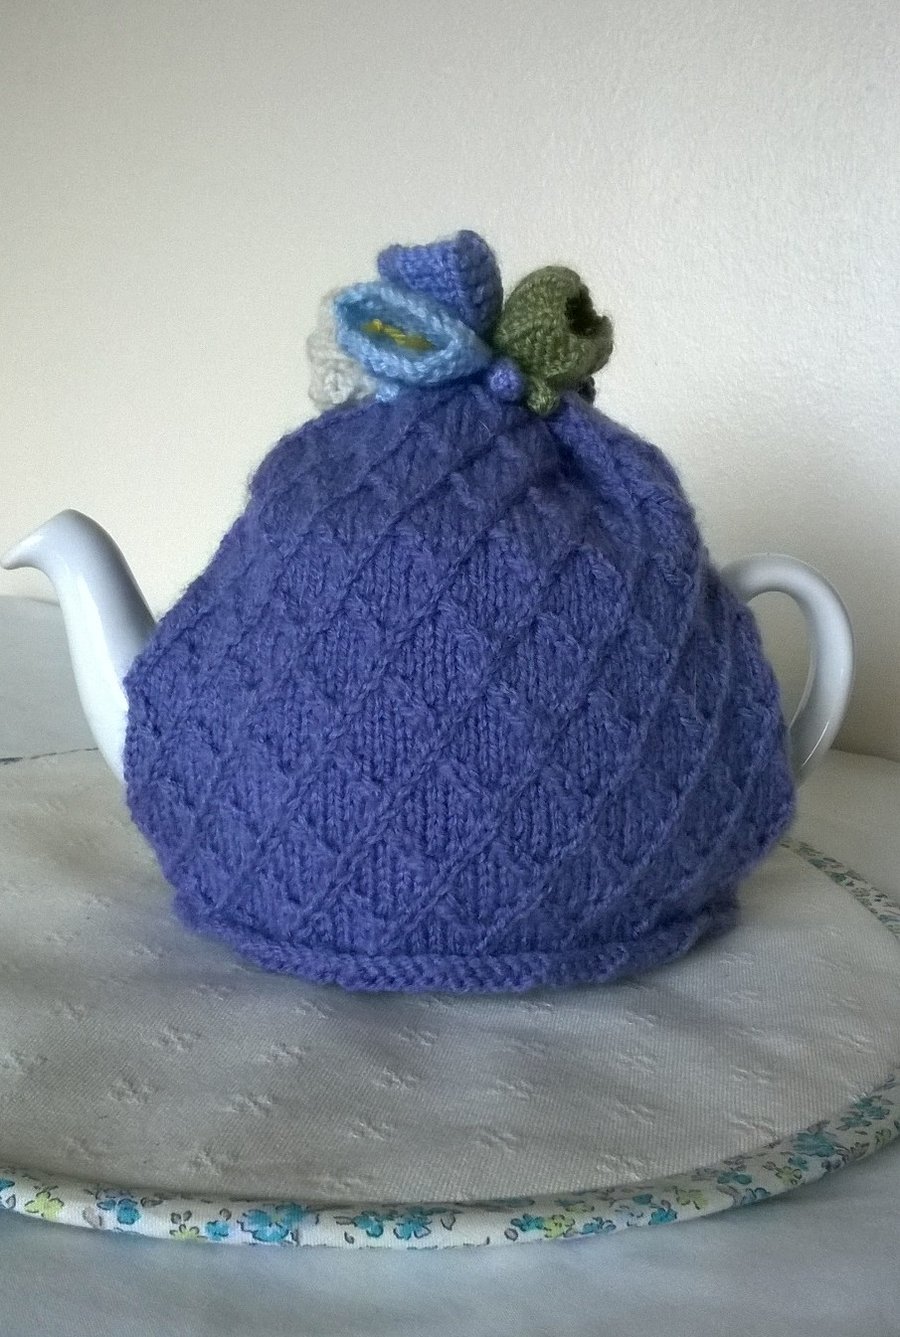 Hand knitted lavender tea cosie with crocus flowers